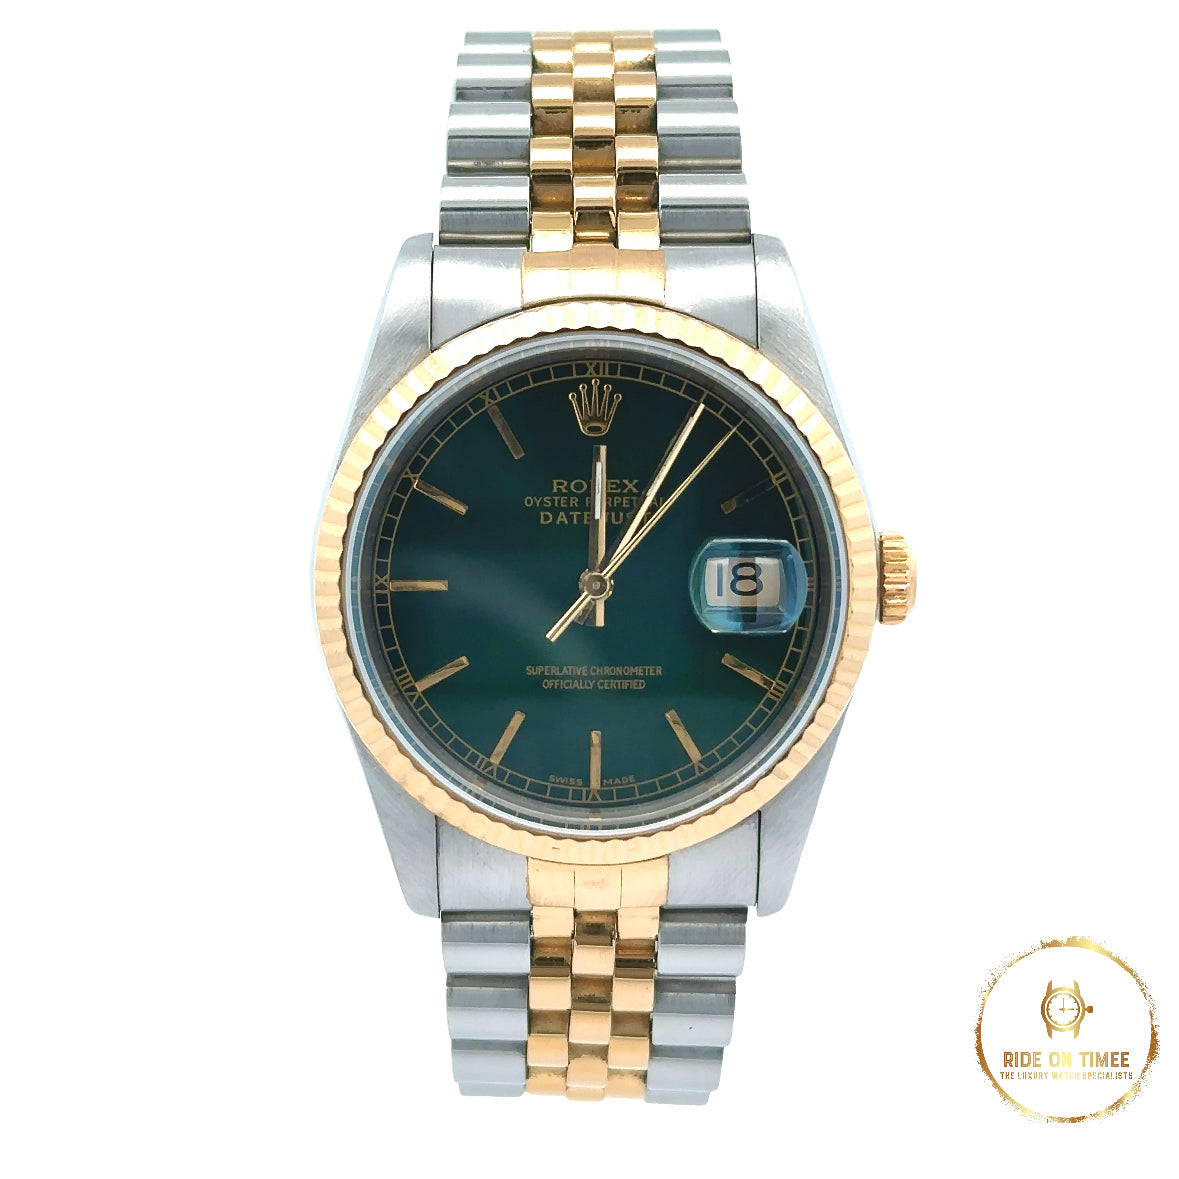 Rolex Datejust 36 Forrest Green Baton Dial ‘16233’ - Ride On Timee